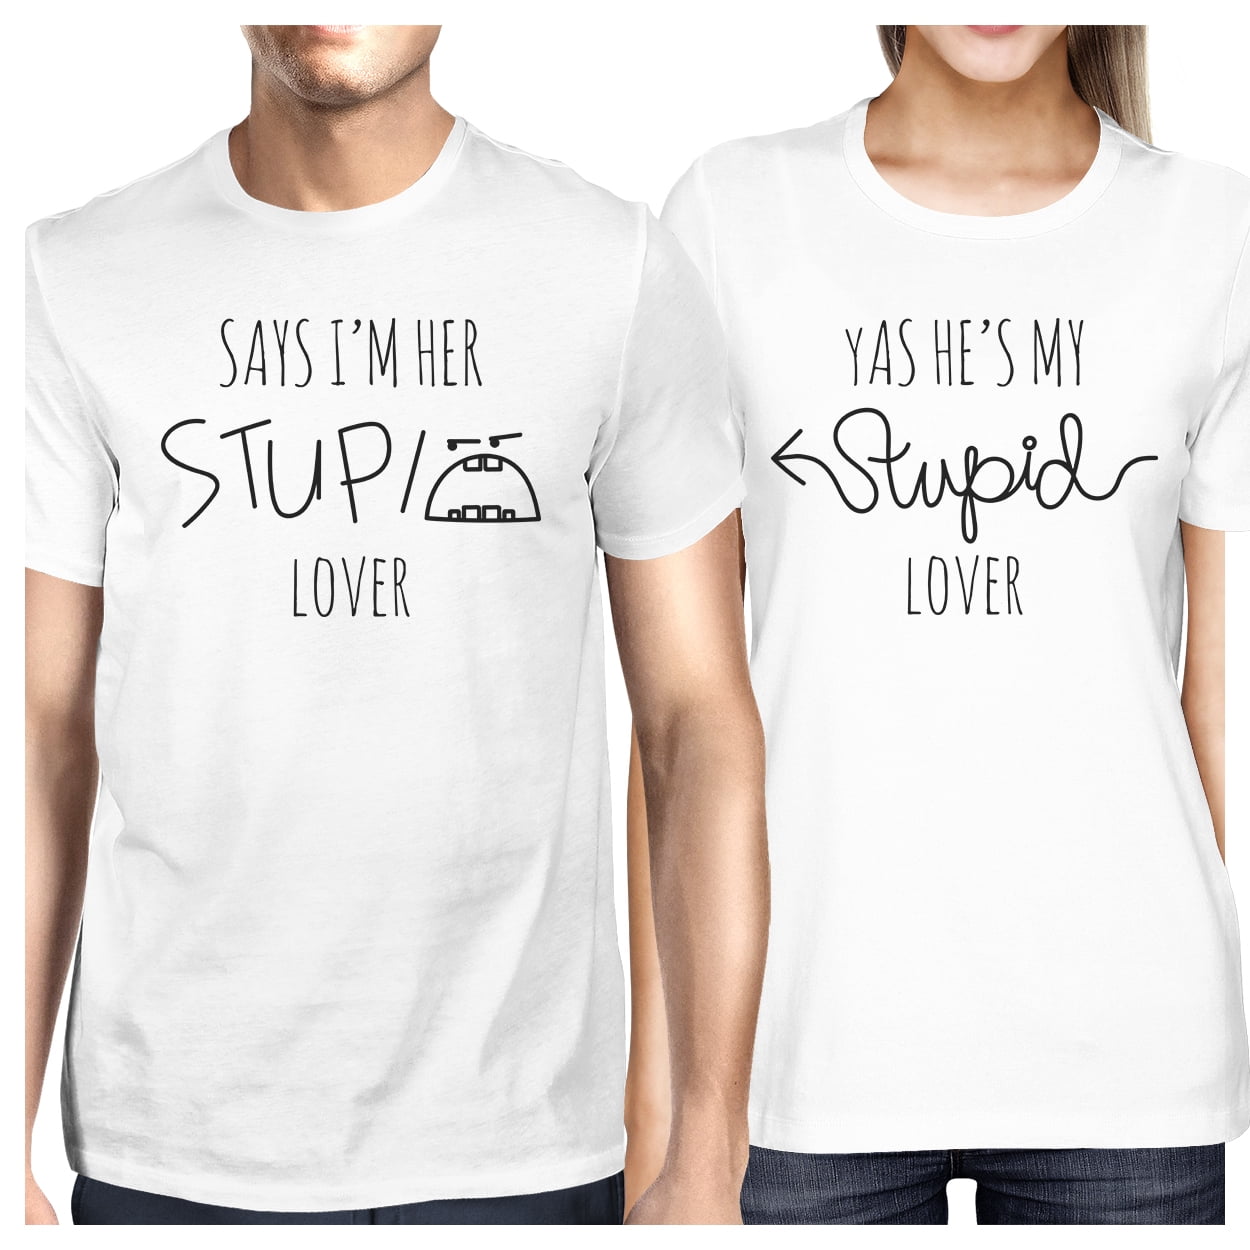 T shirt перевод на русский язык. This Shirt. In this Shirt. Stupid Love Tee. Couples t Shirt quotes.